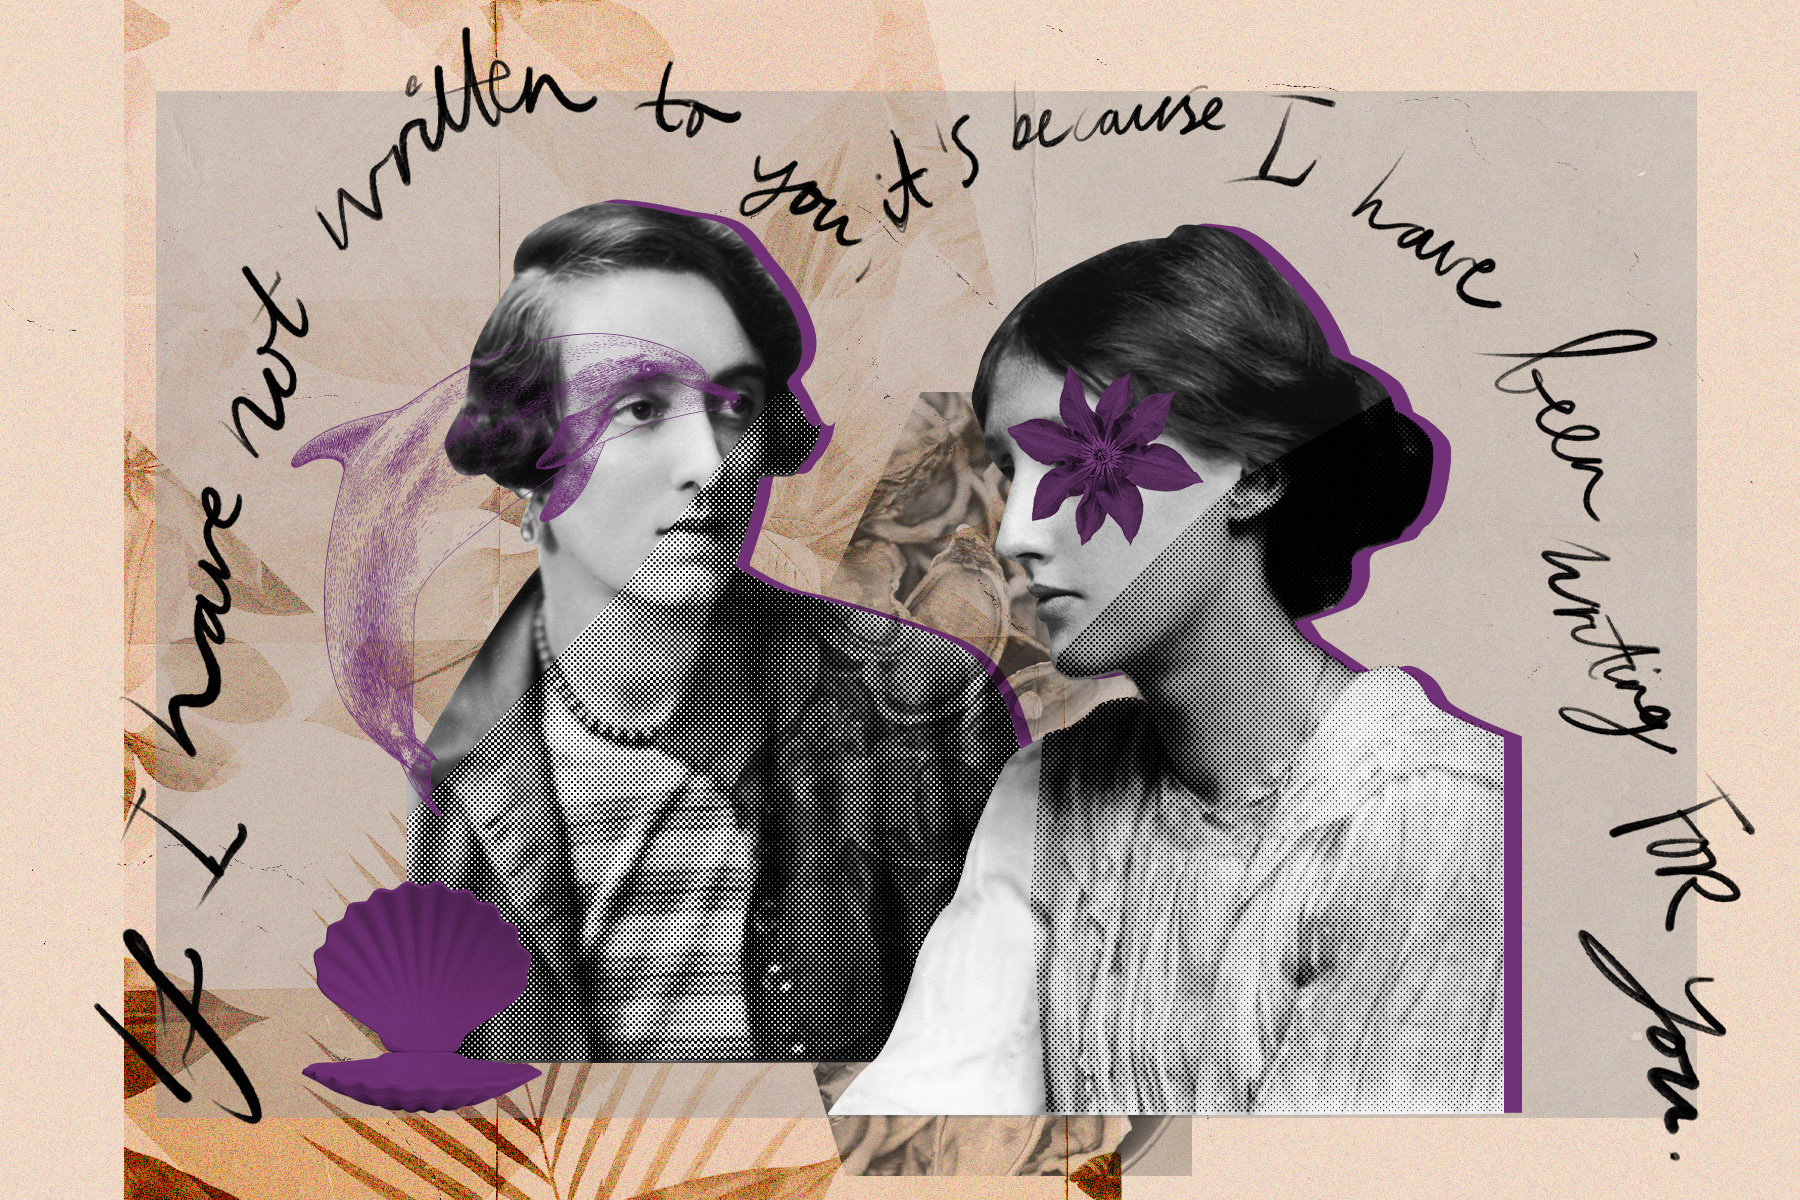 A collage of images of Vita Sackville-West and Virginia Woolf with illustrations of love letters